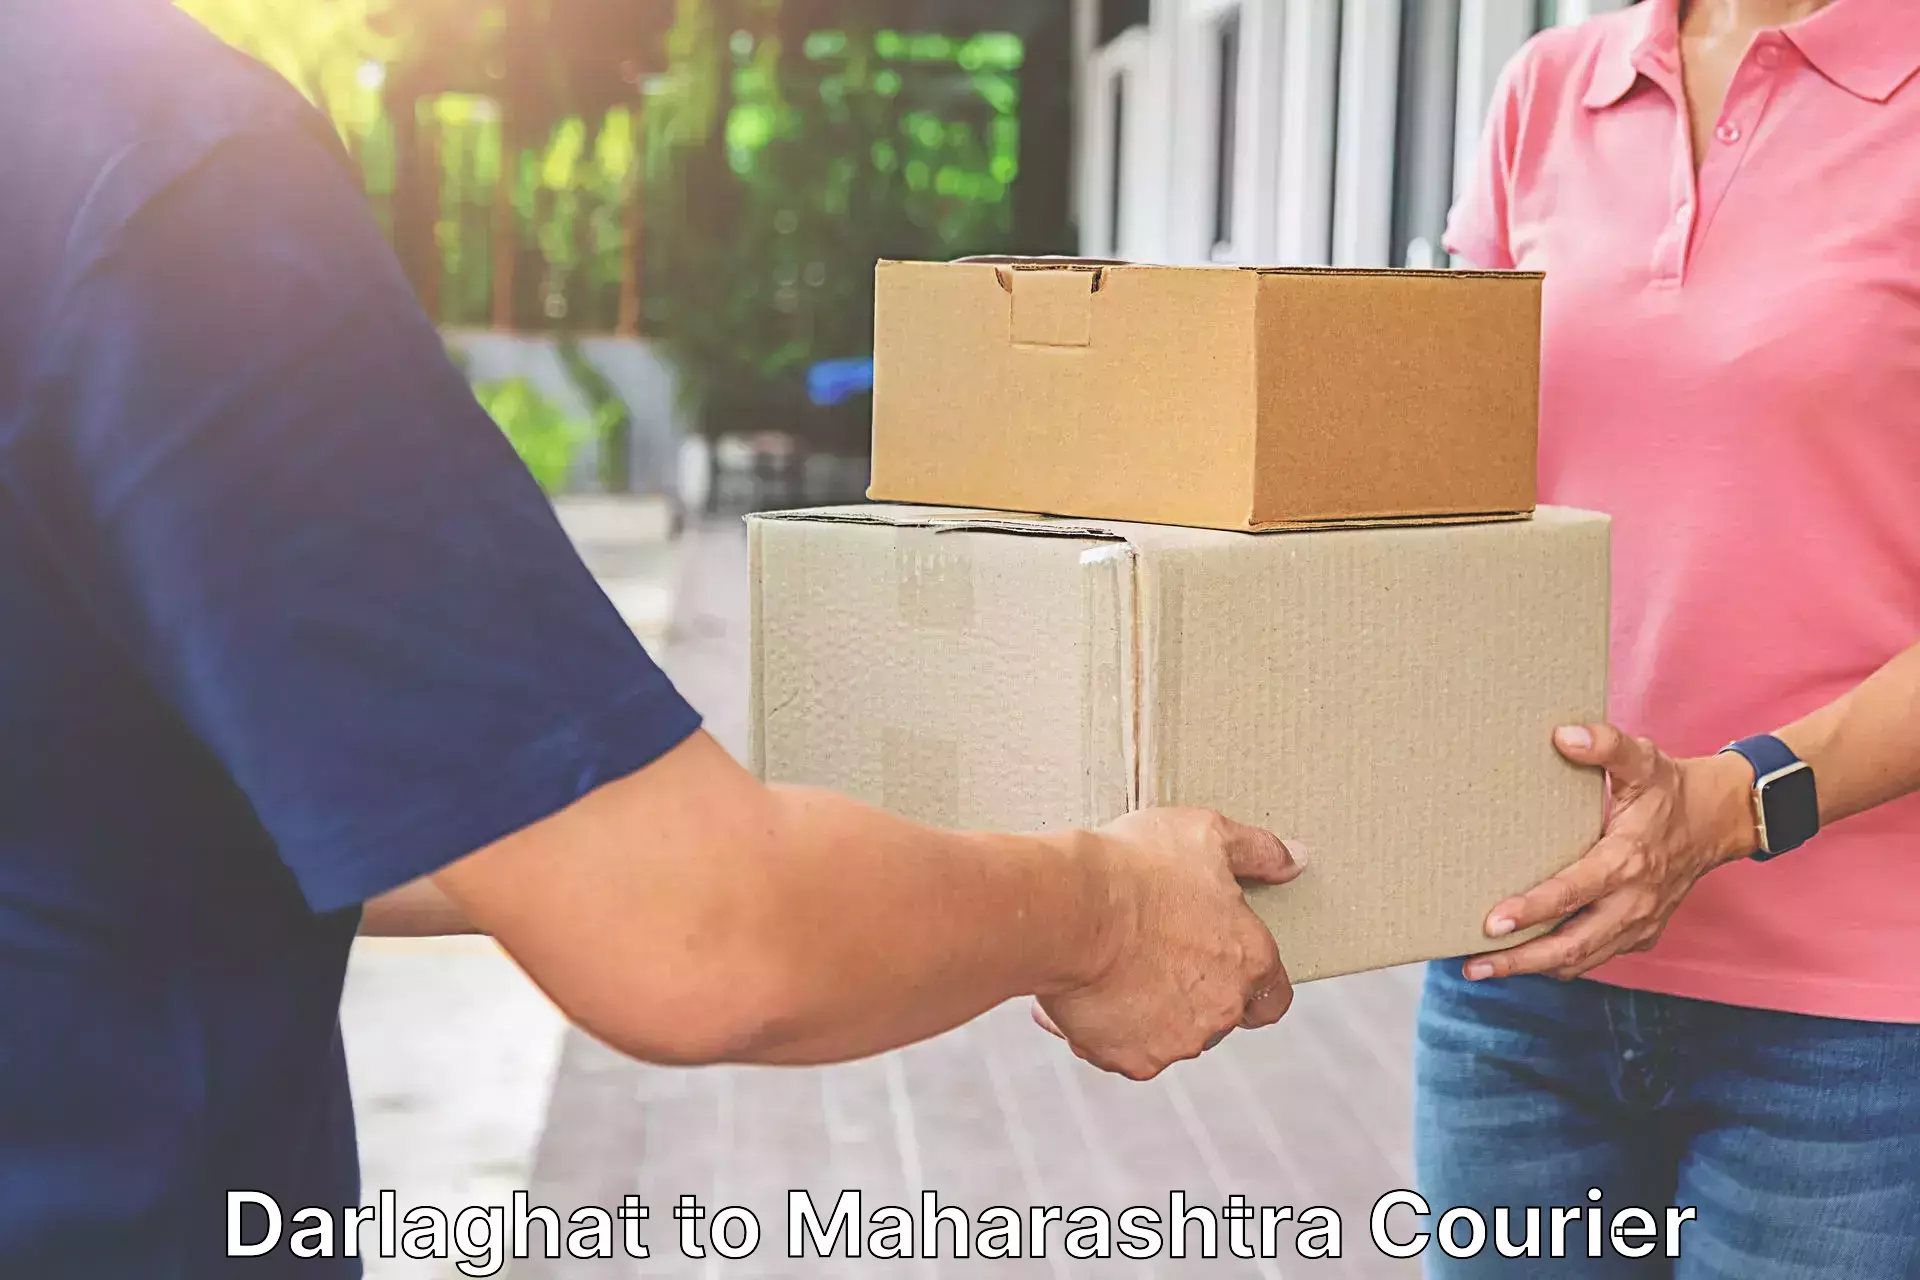 Courier service partnerships Darlaghat to Tata Institute of Social Sciences Mumbai